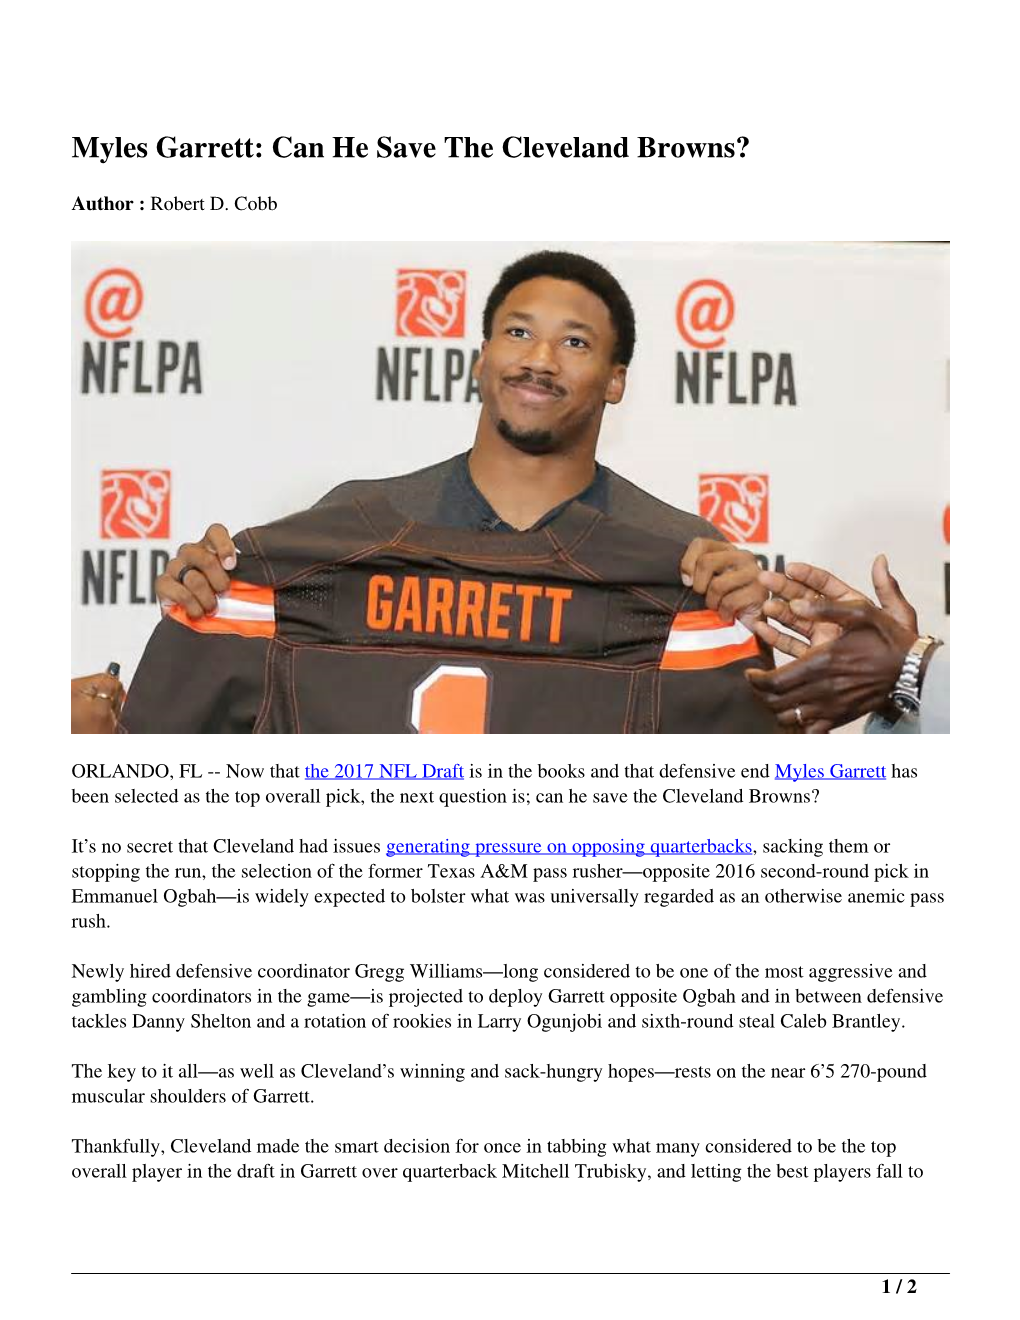 Myles Garrett: Can He Save the Cleveland Browns?